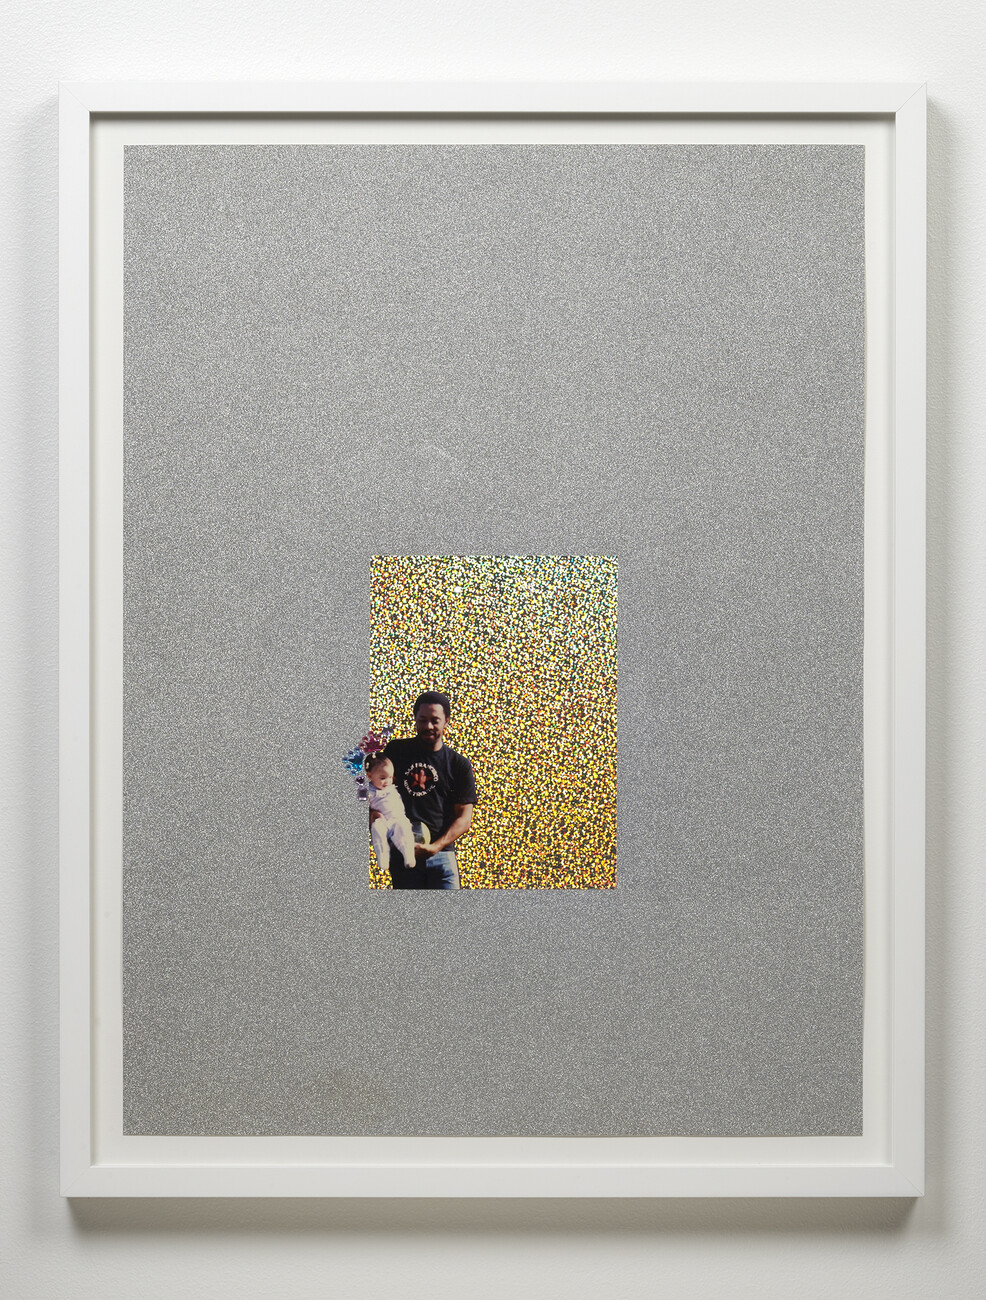 Montage of photo against gold glittered background against larger gray shimmered background